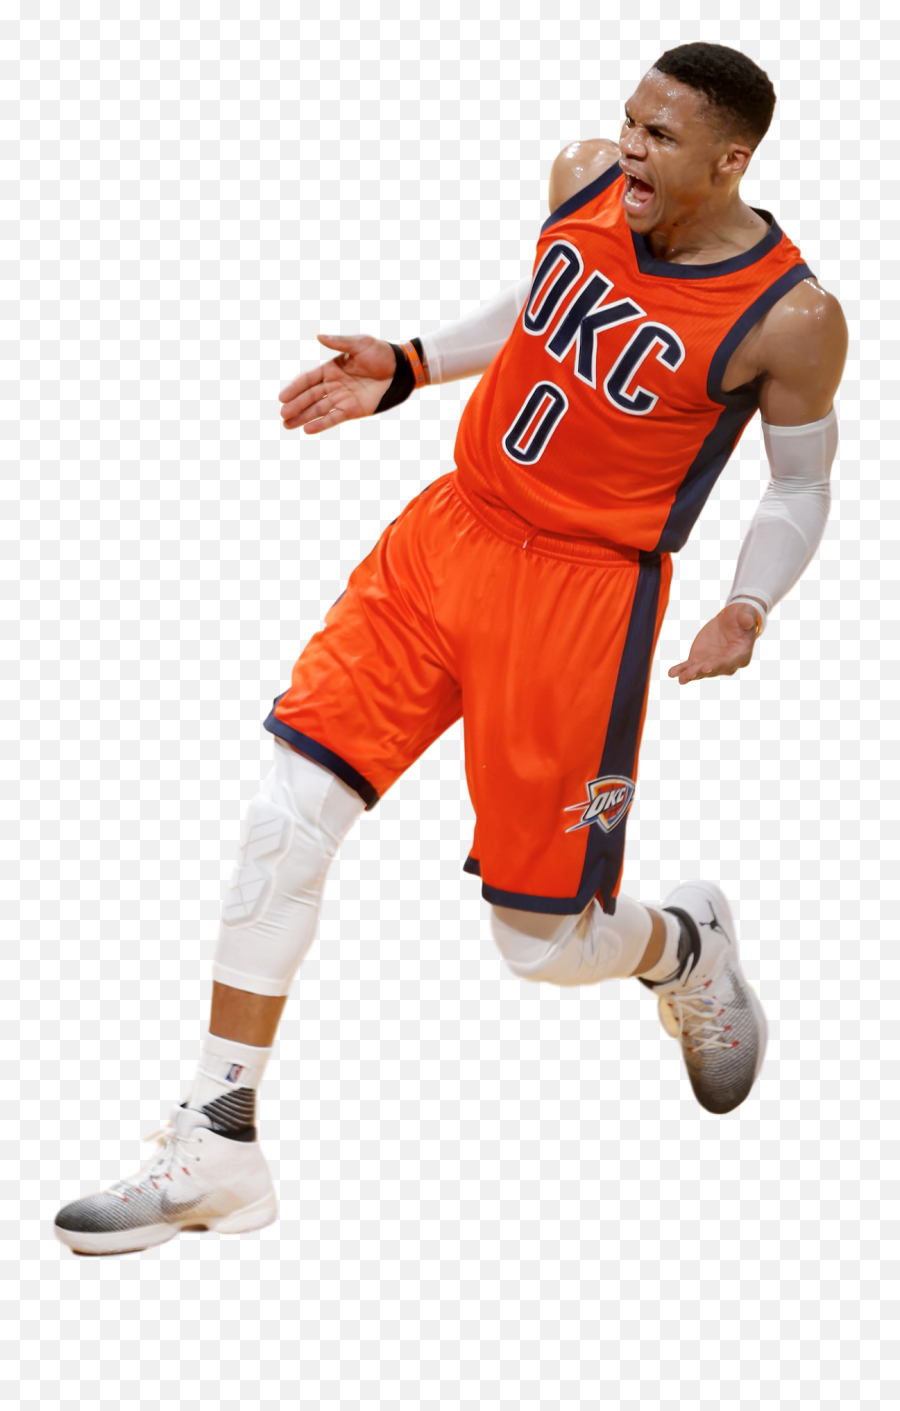 Russell Westbrook Png Hd - Russell Westbrook Transparent Background,Westbrook Png